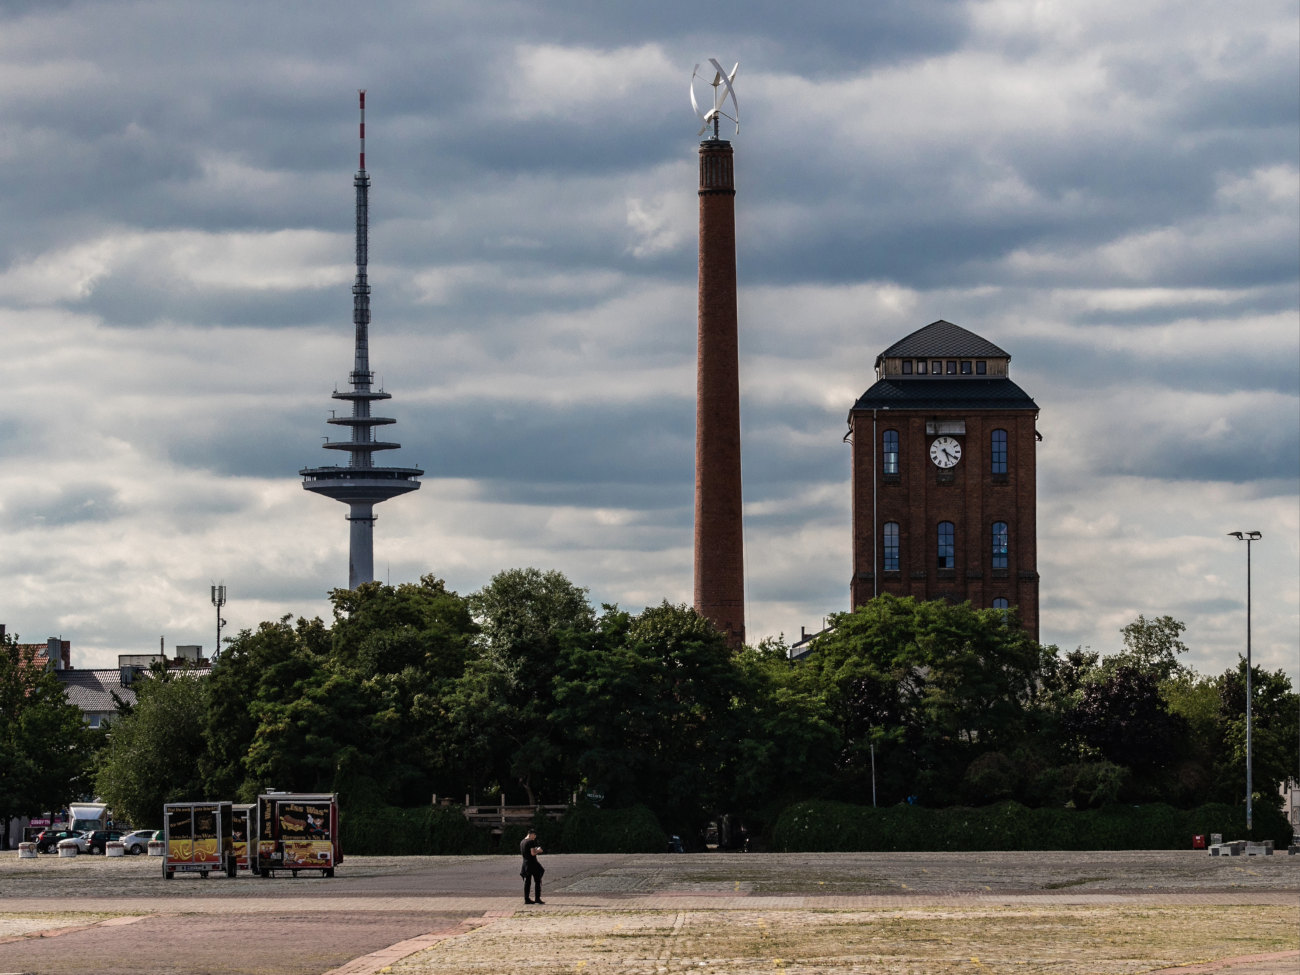 A photo of Schlachthof in Findorff with Walle’s TV tower in the background.